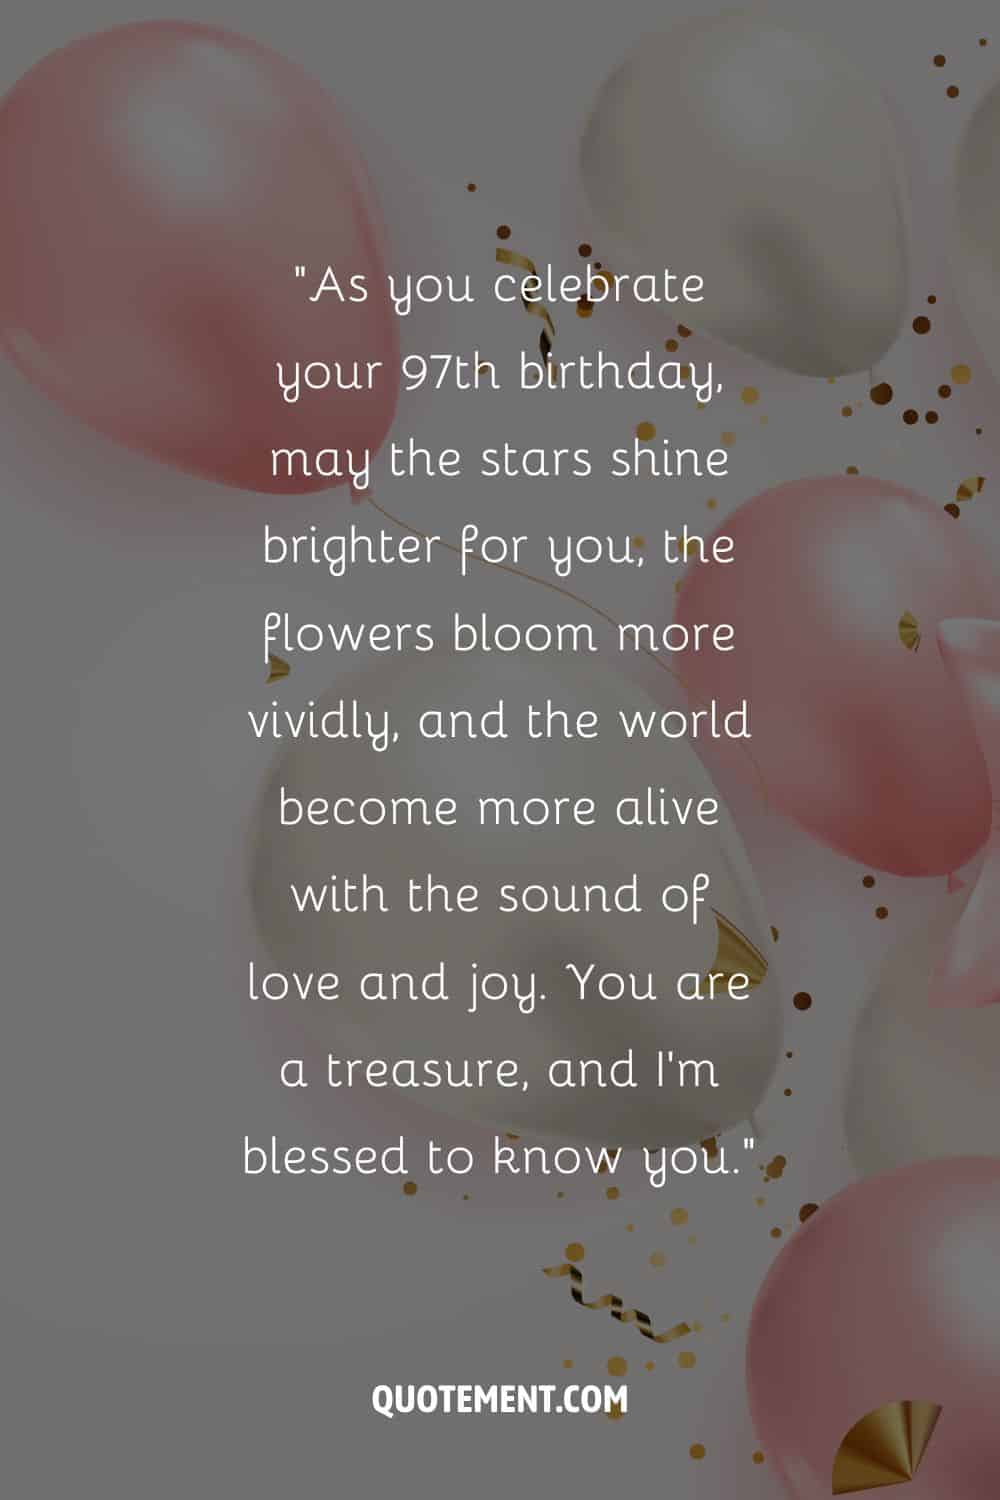 Message for someone special who turns 97 and balloons along with confetti in the background, too
